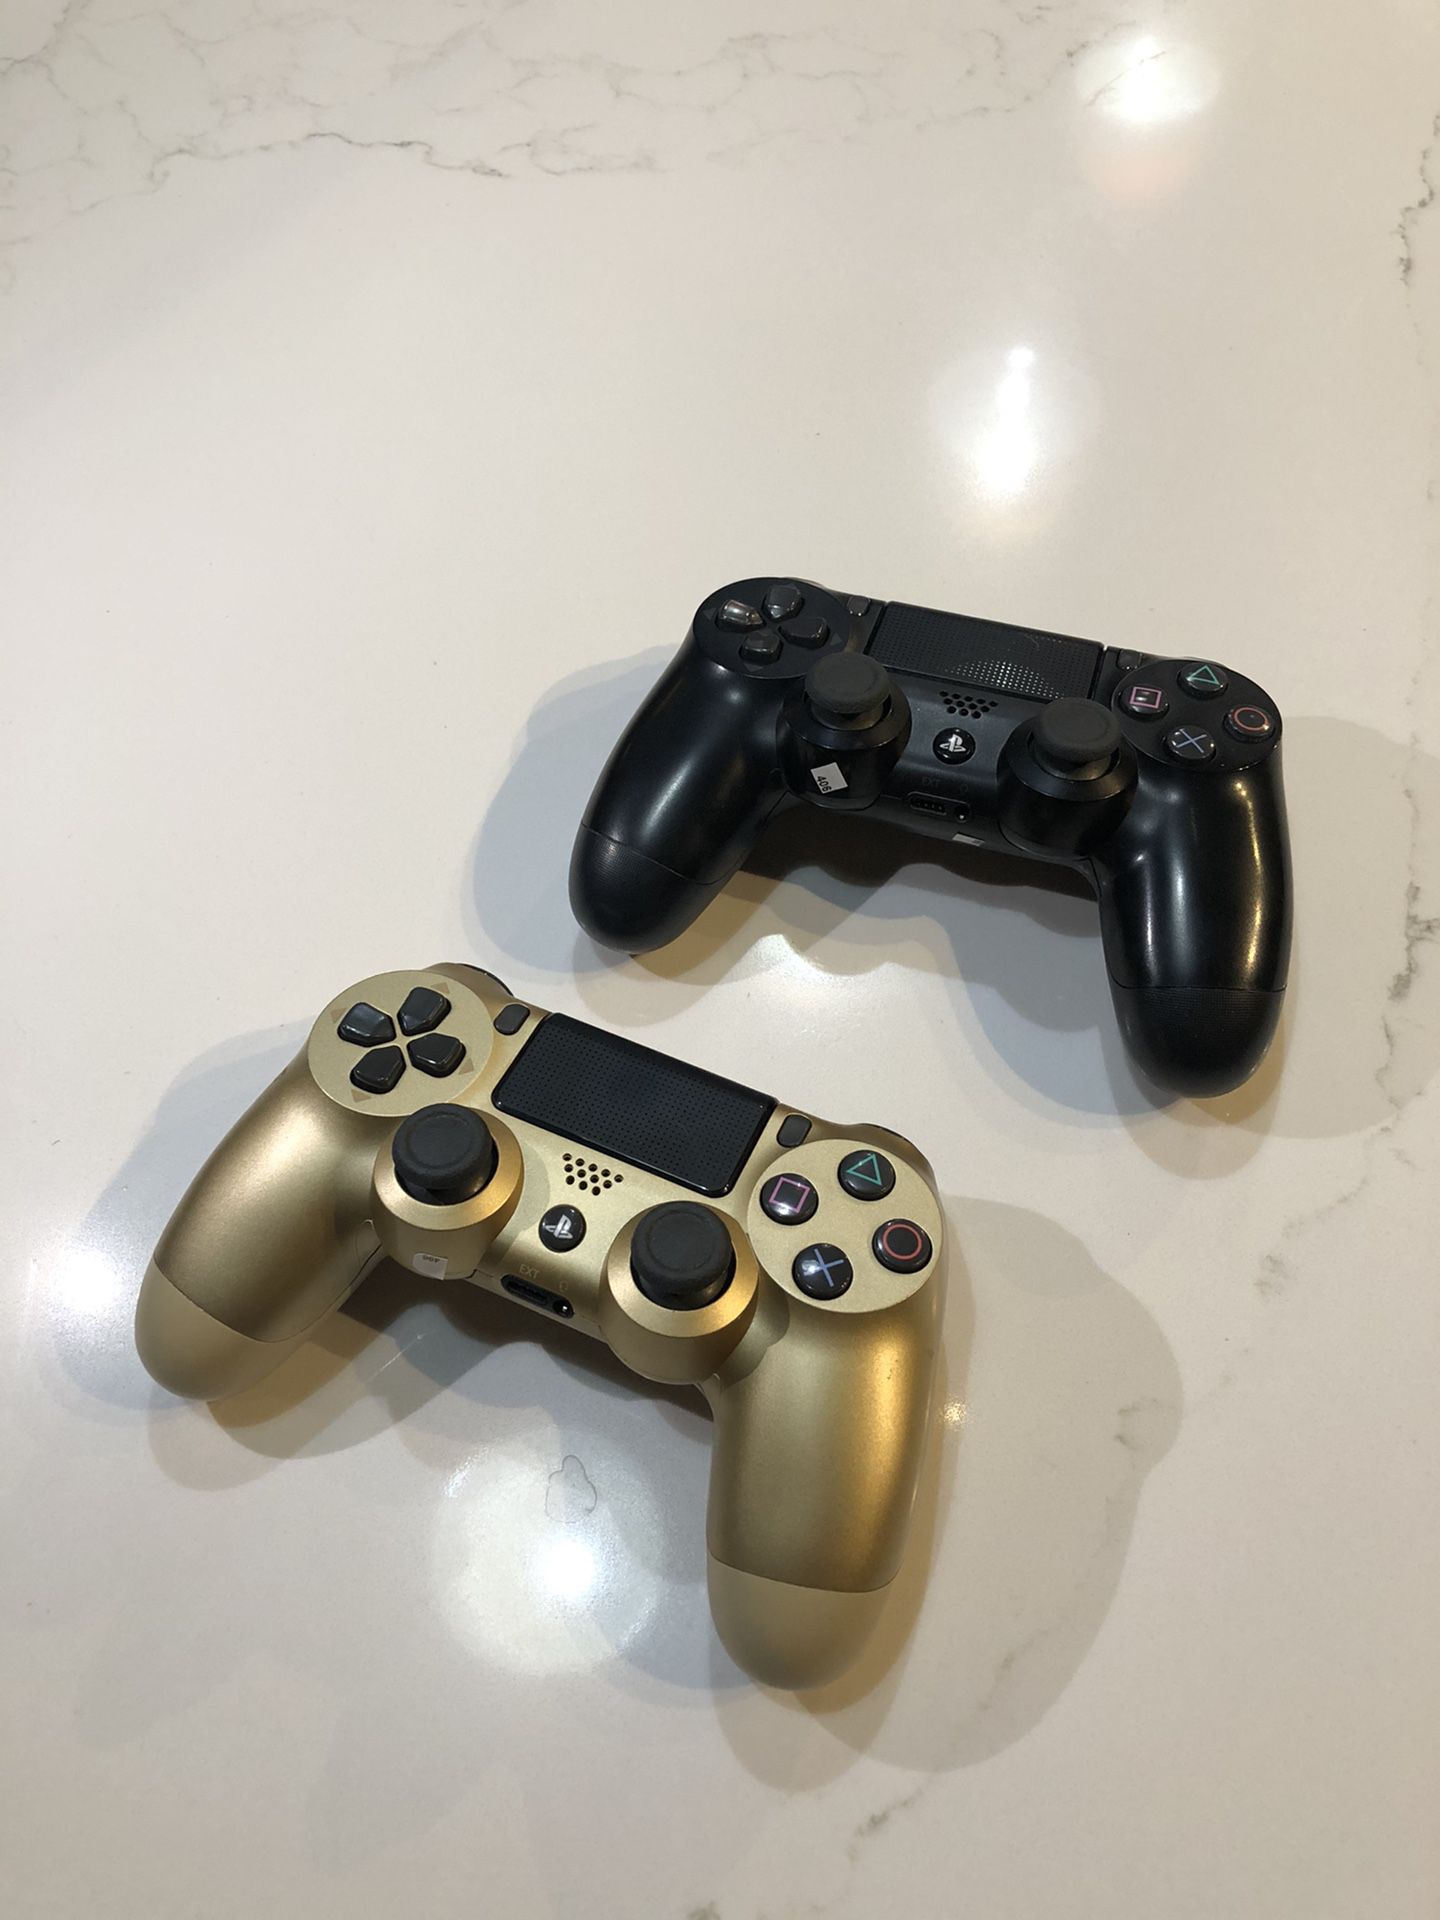 PS4 controllers pre-owned from GameStop. Just out of box